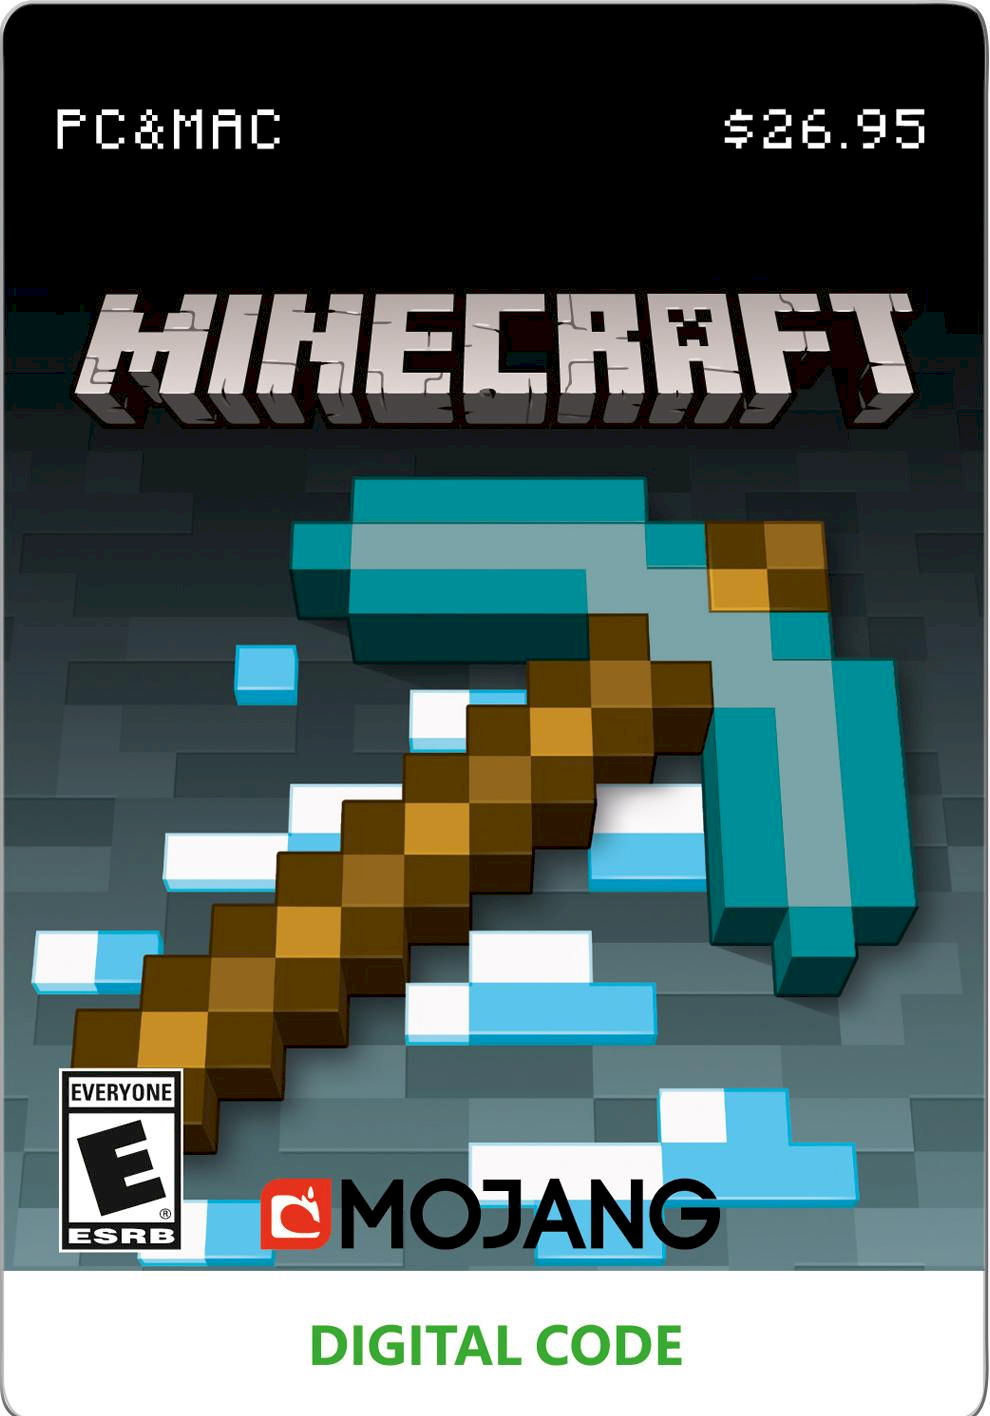 You can get the Java Minecraft Edition via prepaid cards, do 3 of them work Or do you need others, can you tell me if that s the one